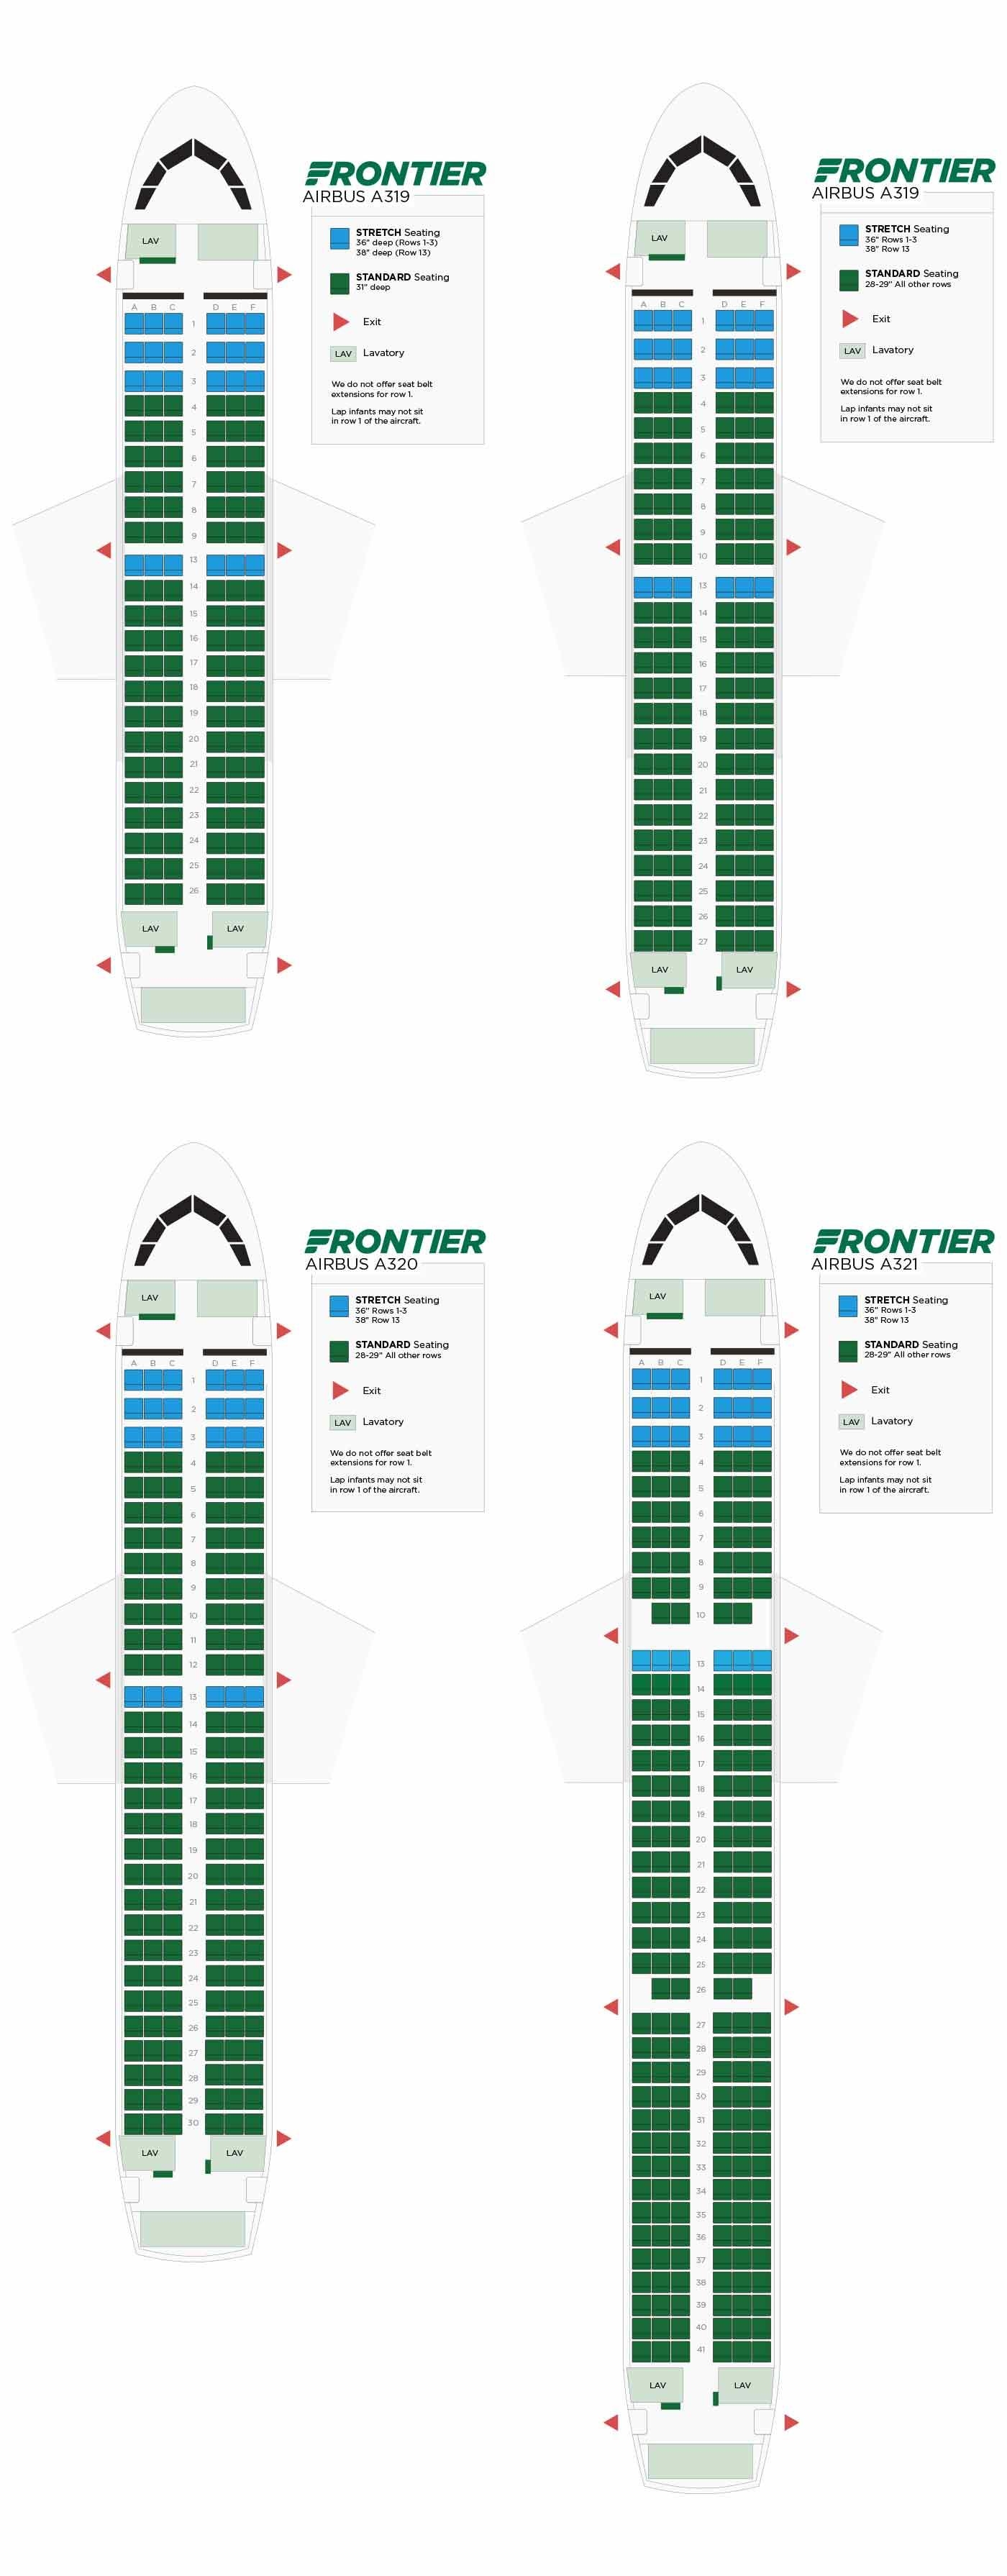 does frontier airlines have seat assignments